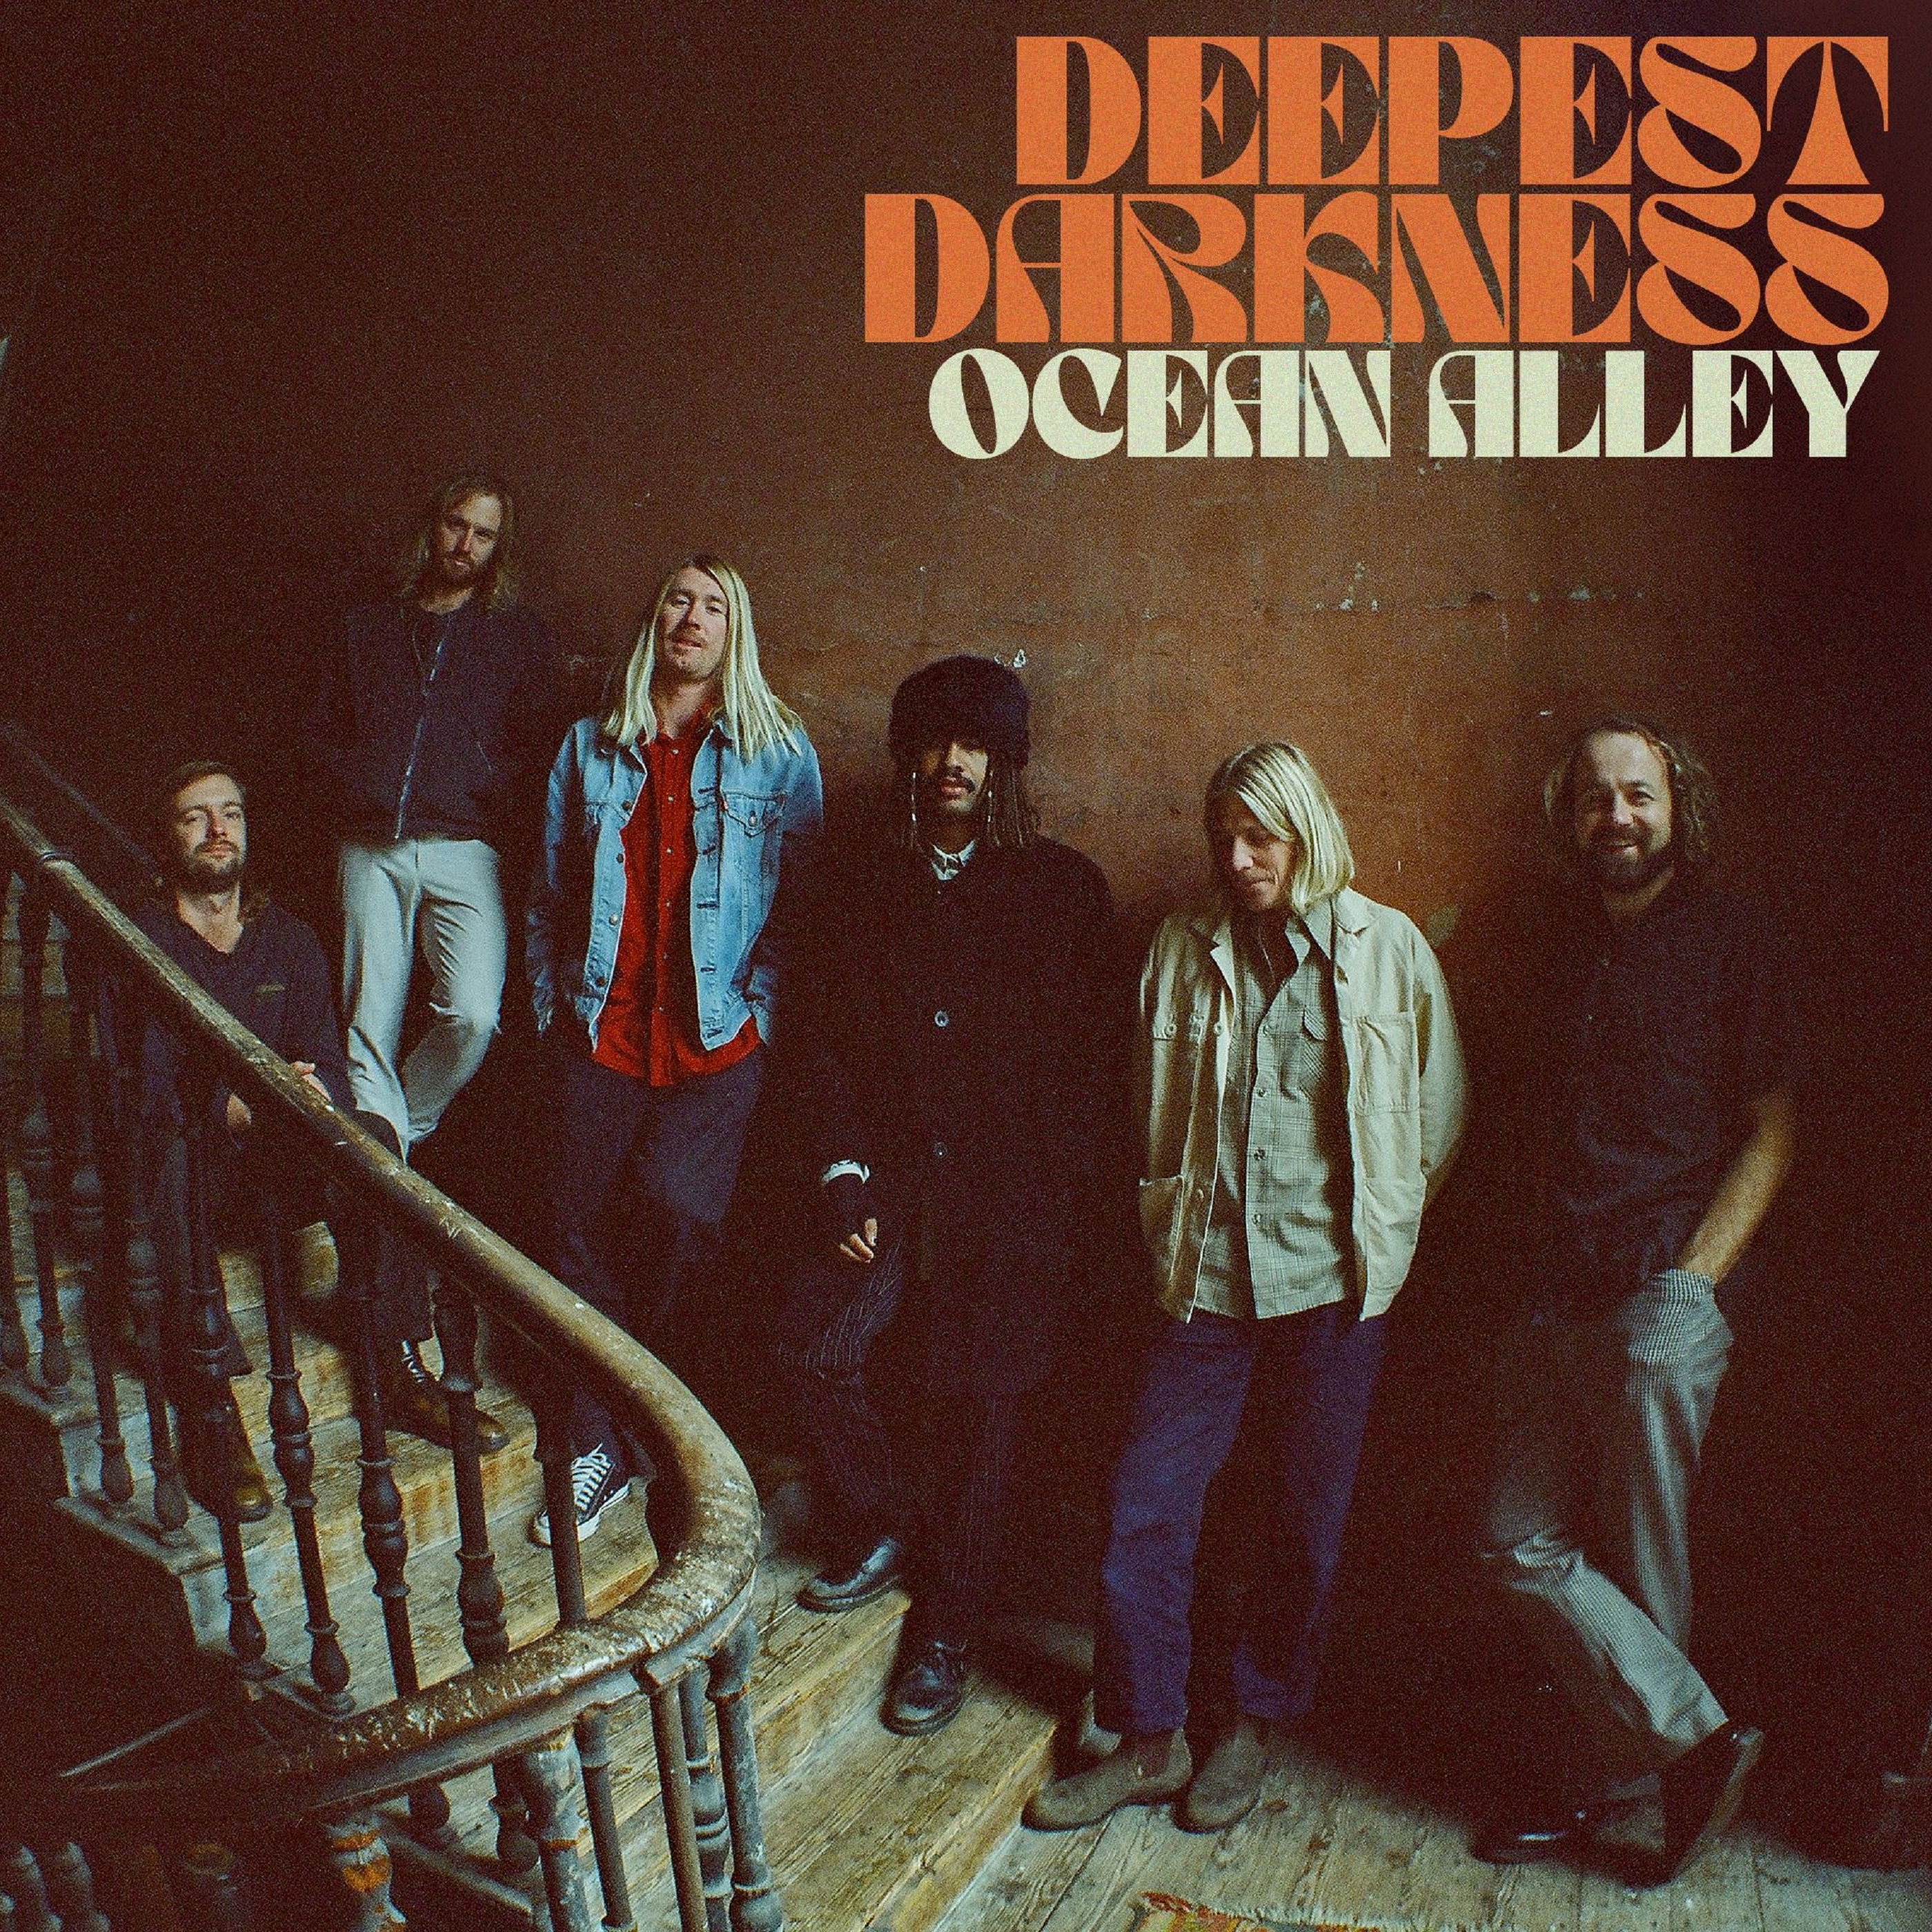 Aussie Band Ocean Alley Release New Single "Deepest Darkness" - US Tour Mapped for Summer